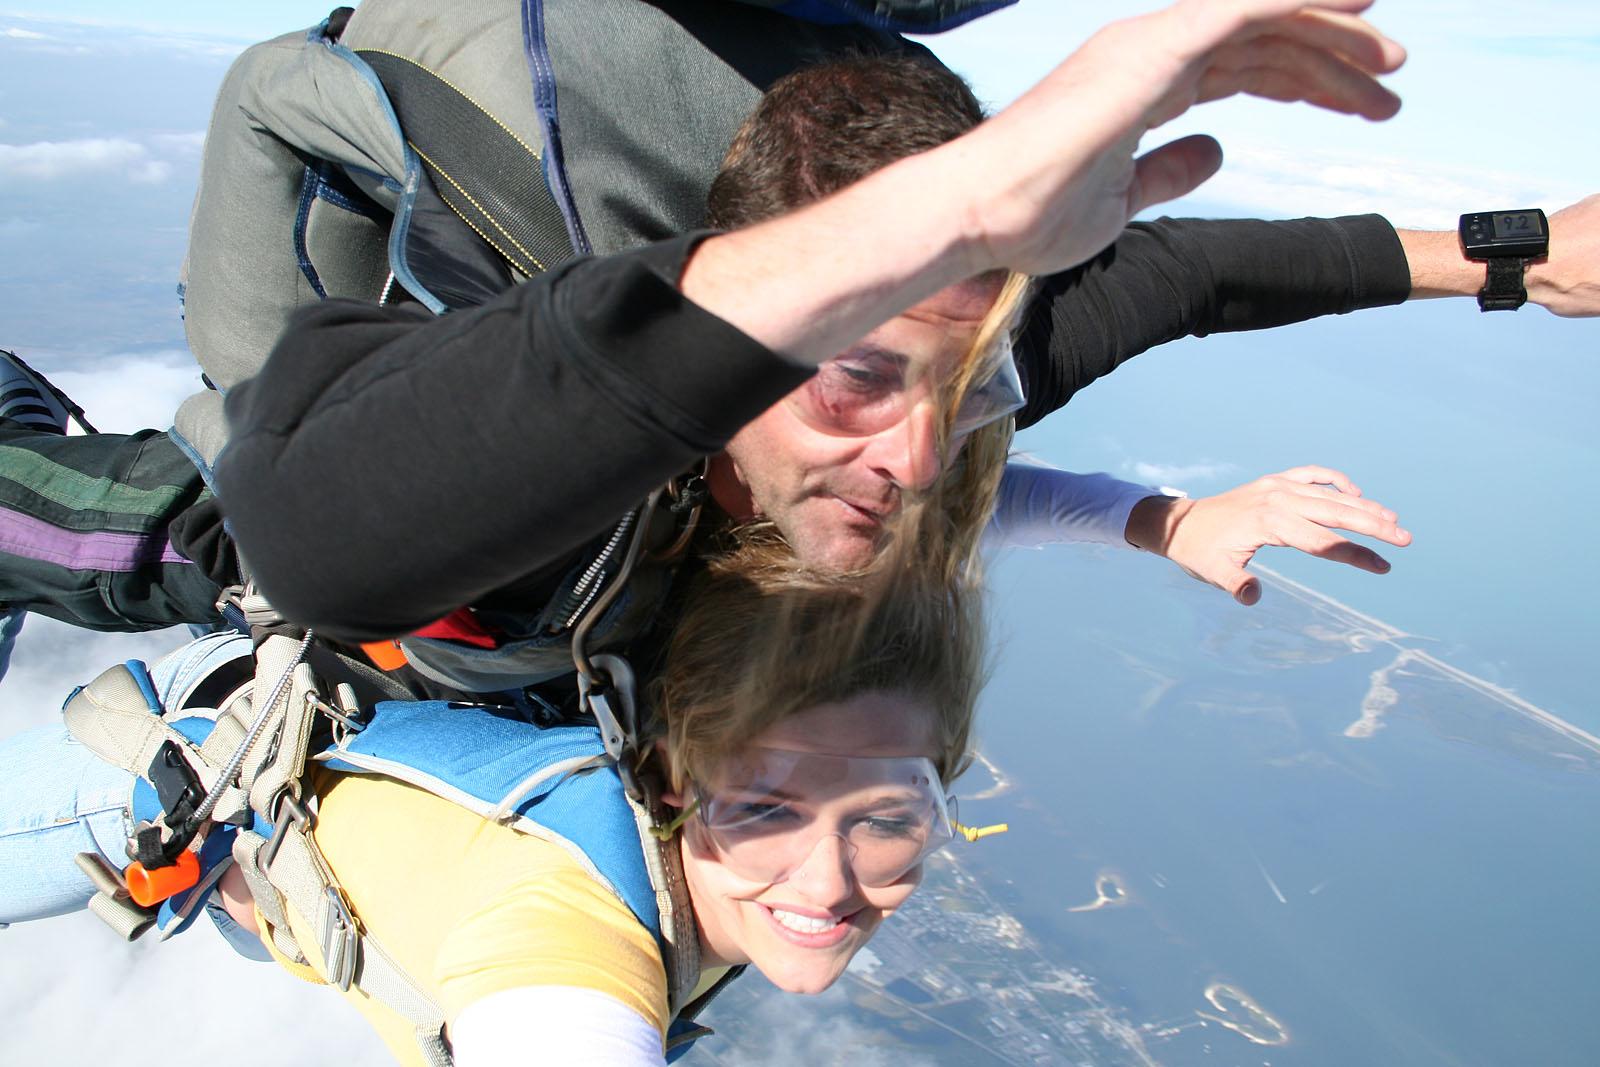 Pictures of Samantha Gauge and Brooke Skye going sky diving #53557378